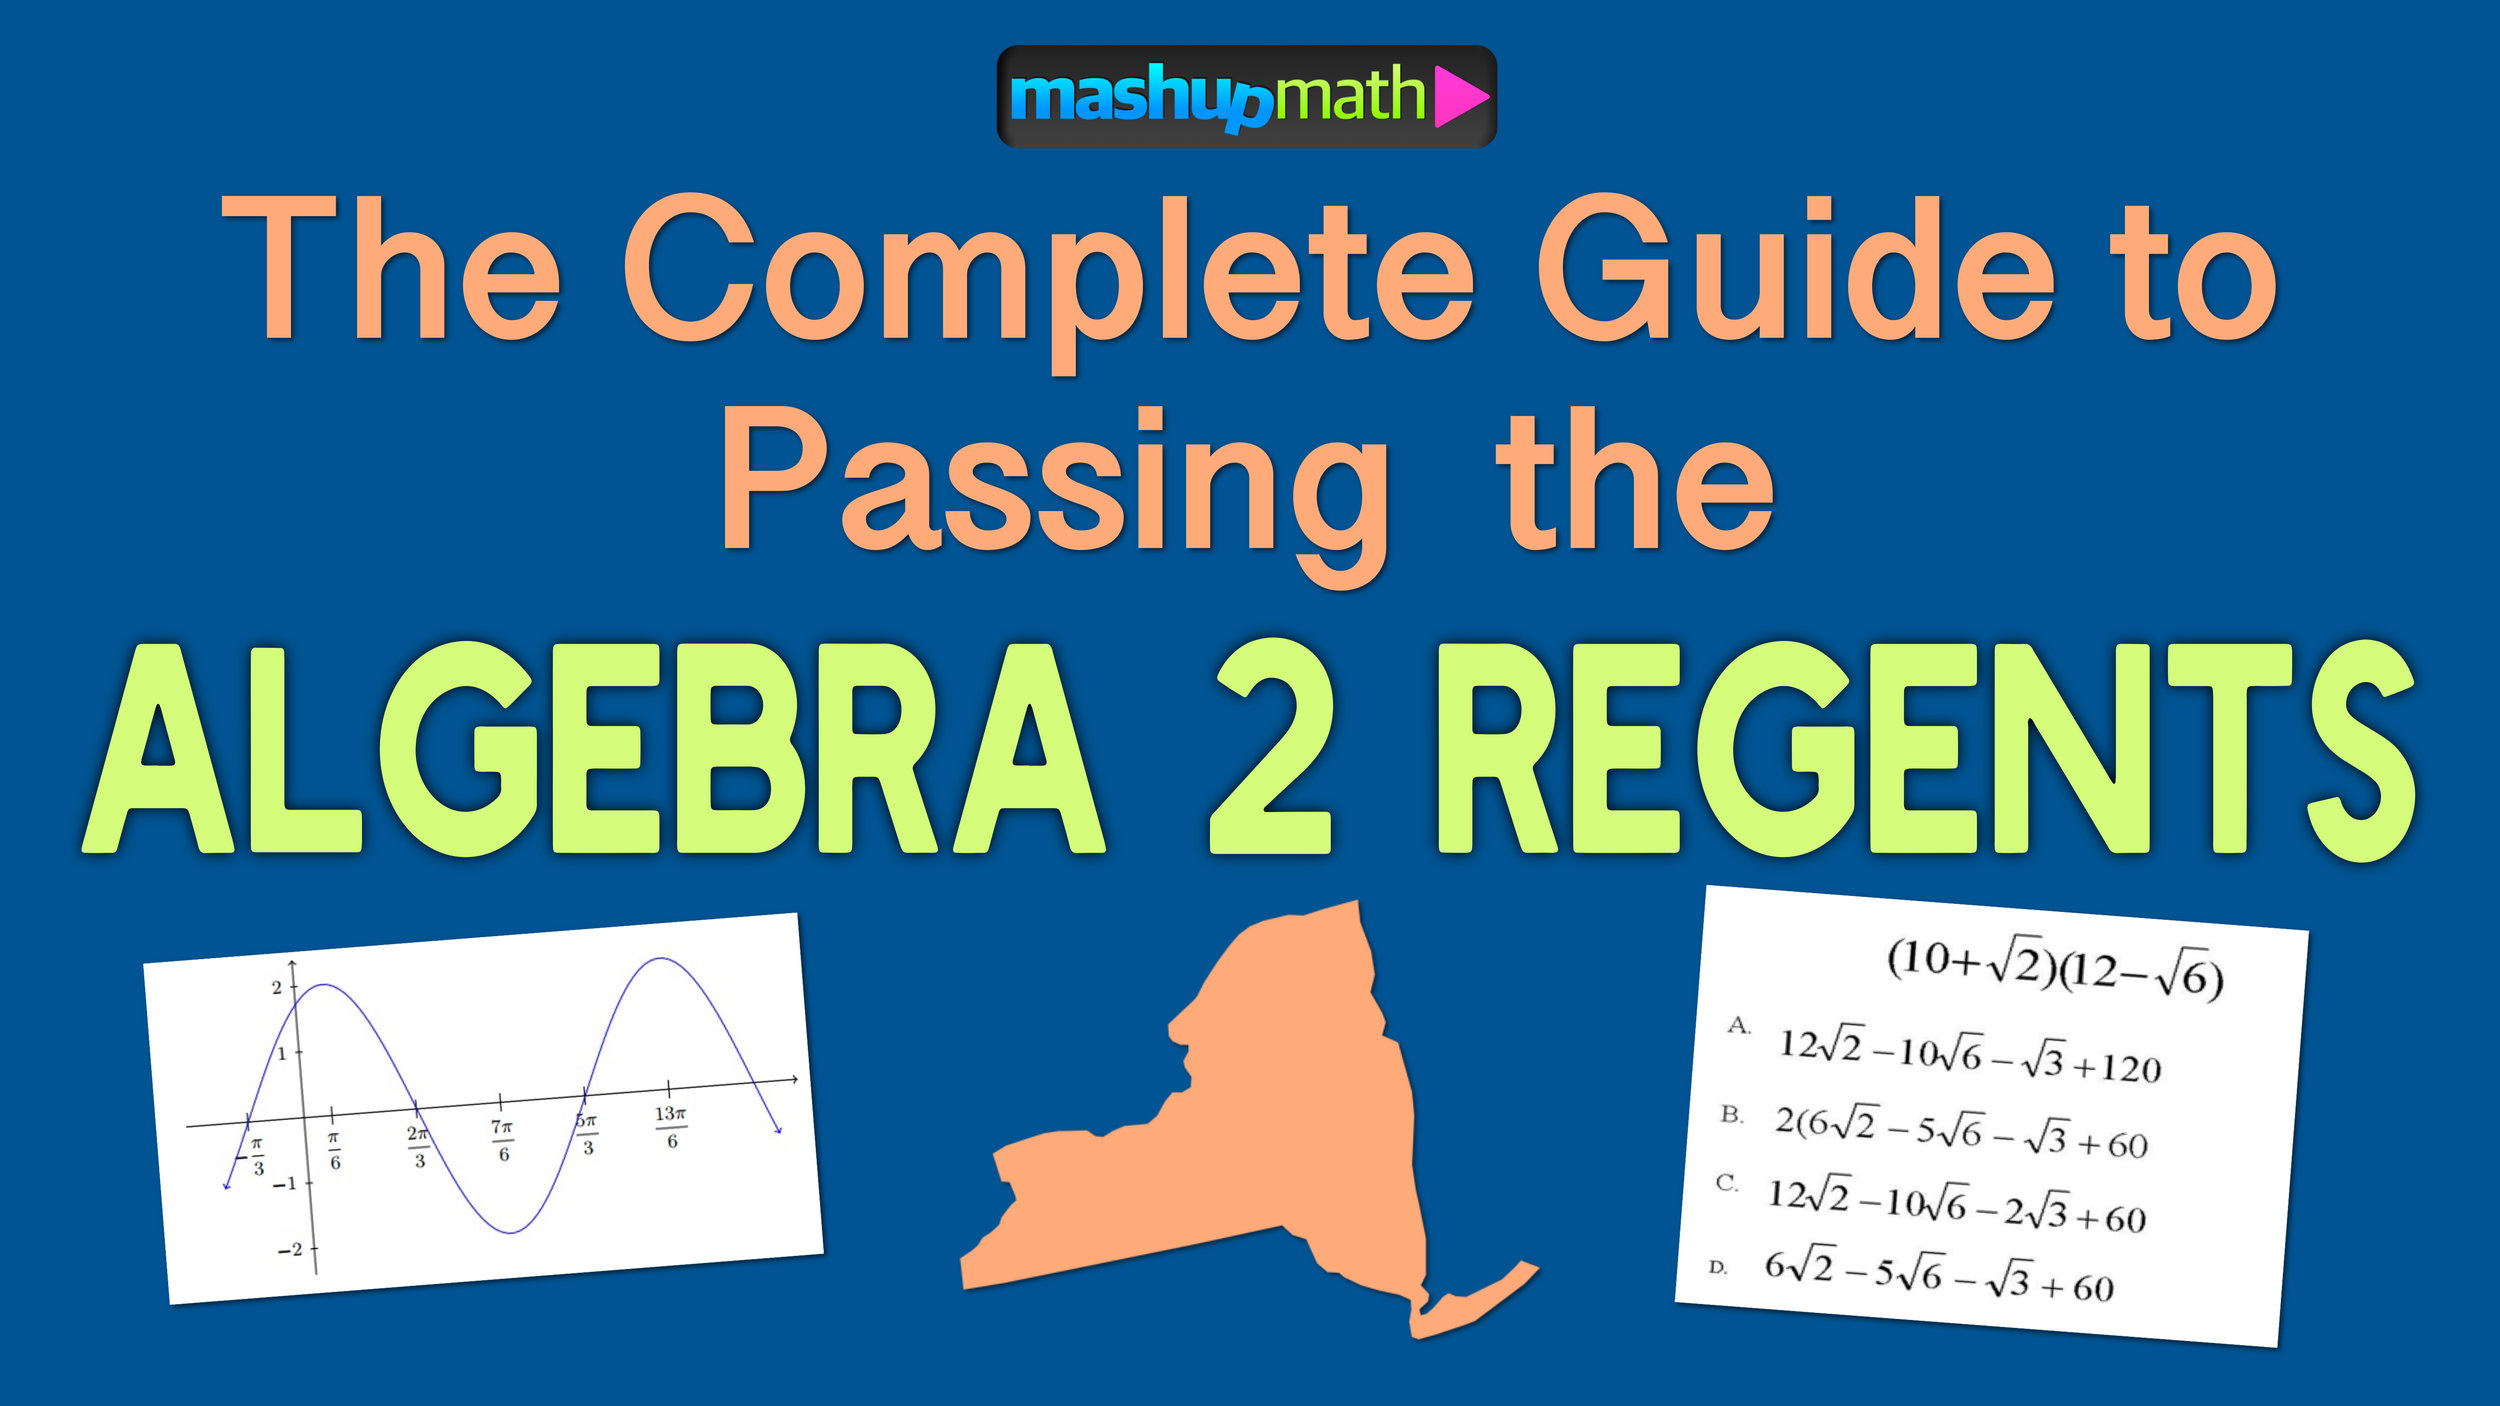 The Ultimate Guide to Passing the Algebra 2 Regents Exam — Mashup Math